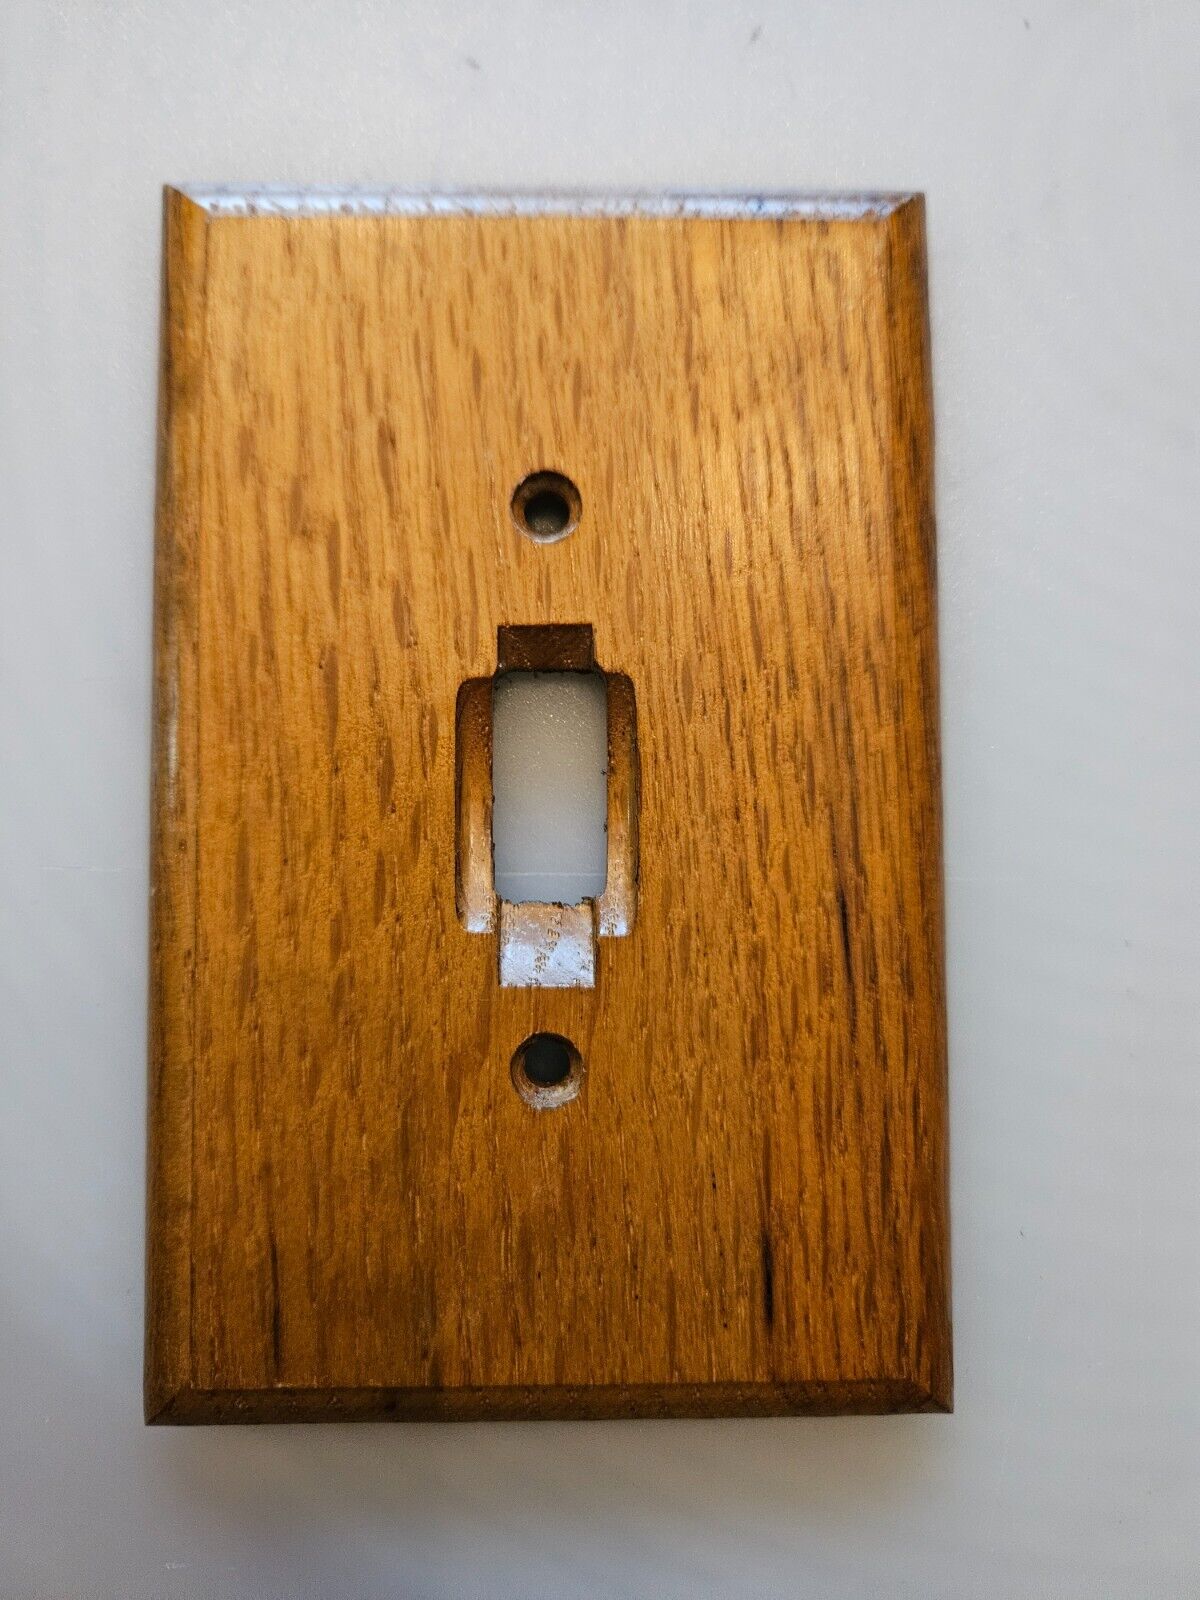 Vintage Wood Receptacle, Switch Plate Cover. More U Buy, The More U Save